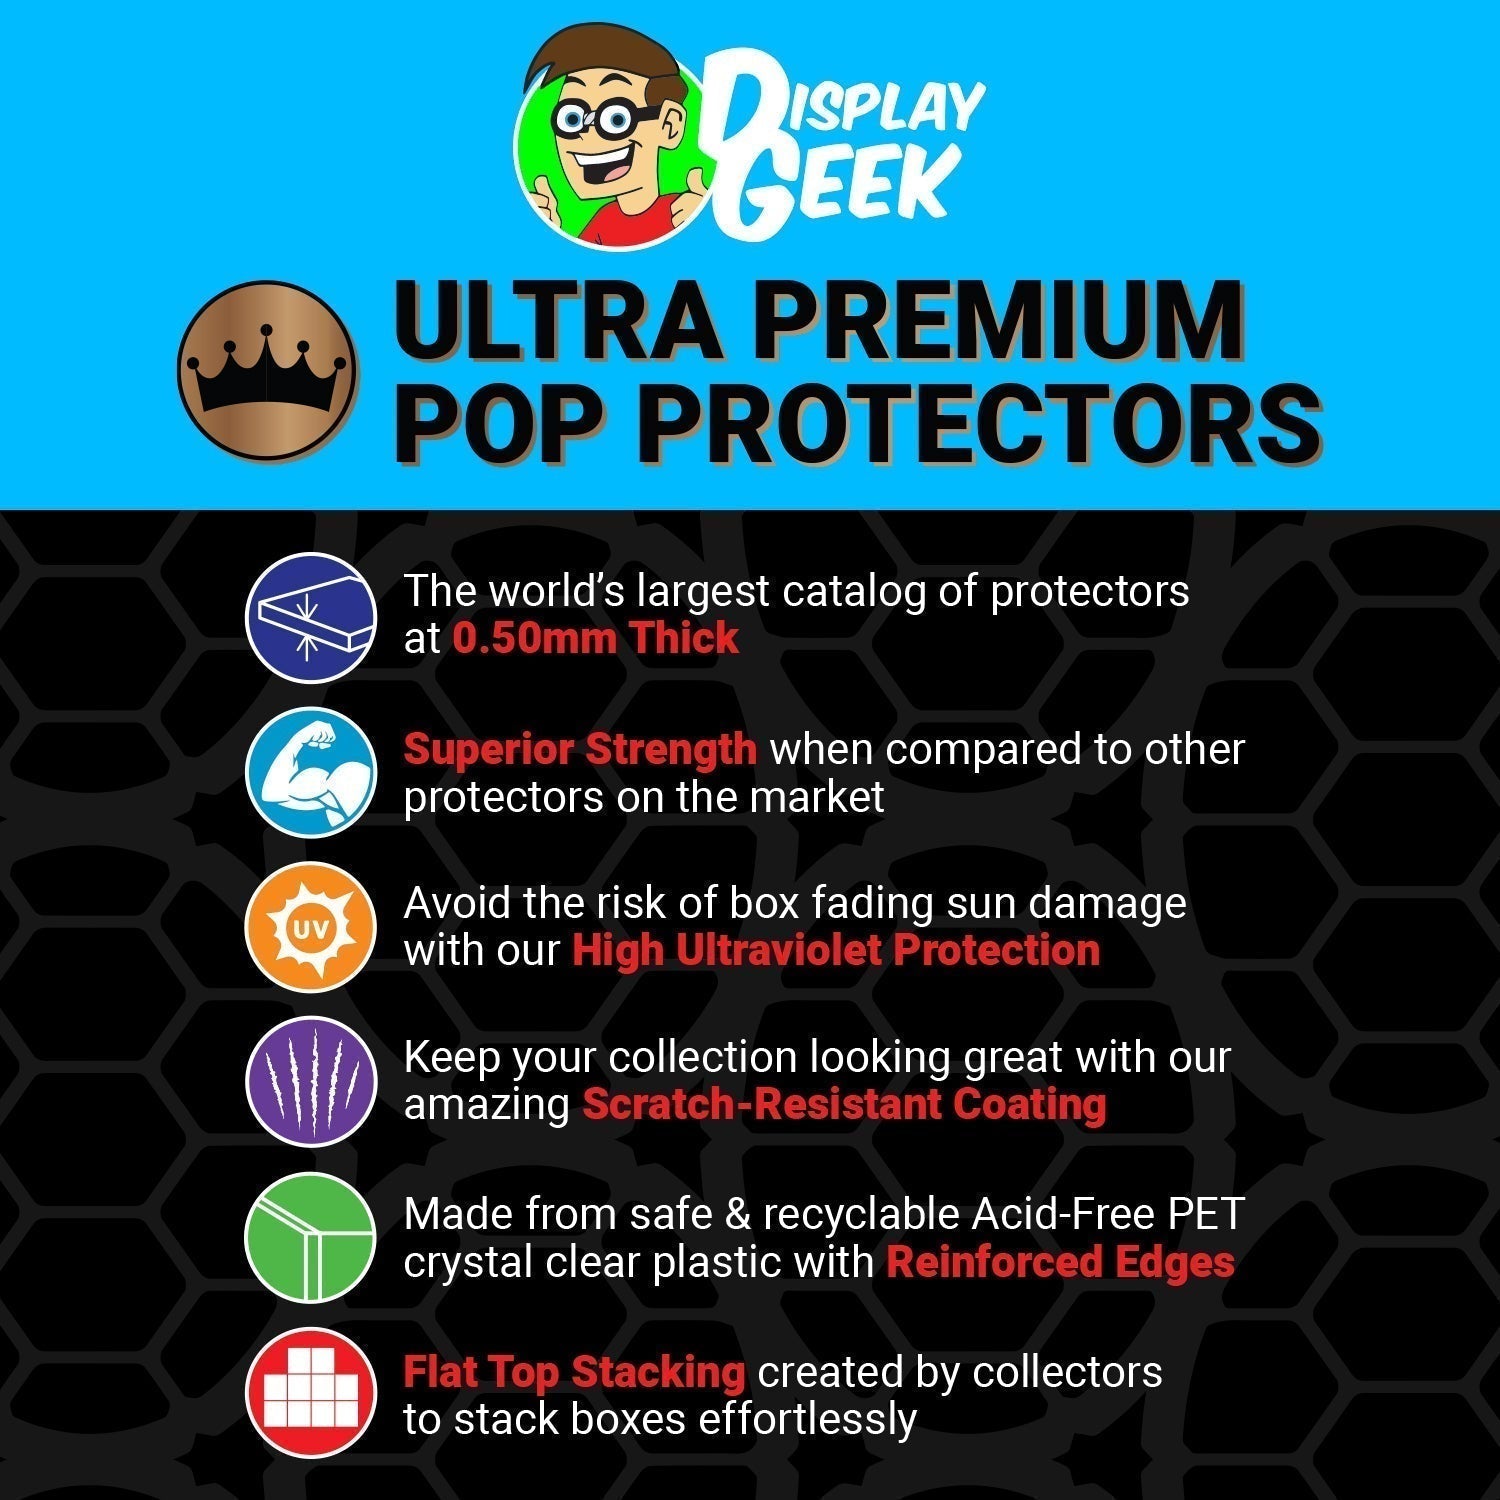 Pop Protector for Brandalised Flying Balloon Girl #01 Funko Pop Art Covers - PPG Pop Protector Guide Search Created by Display Geek